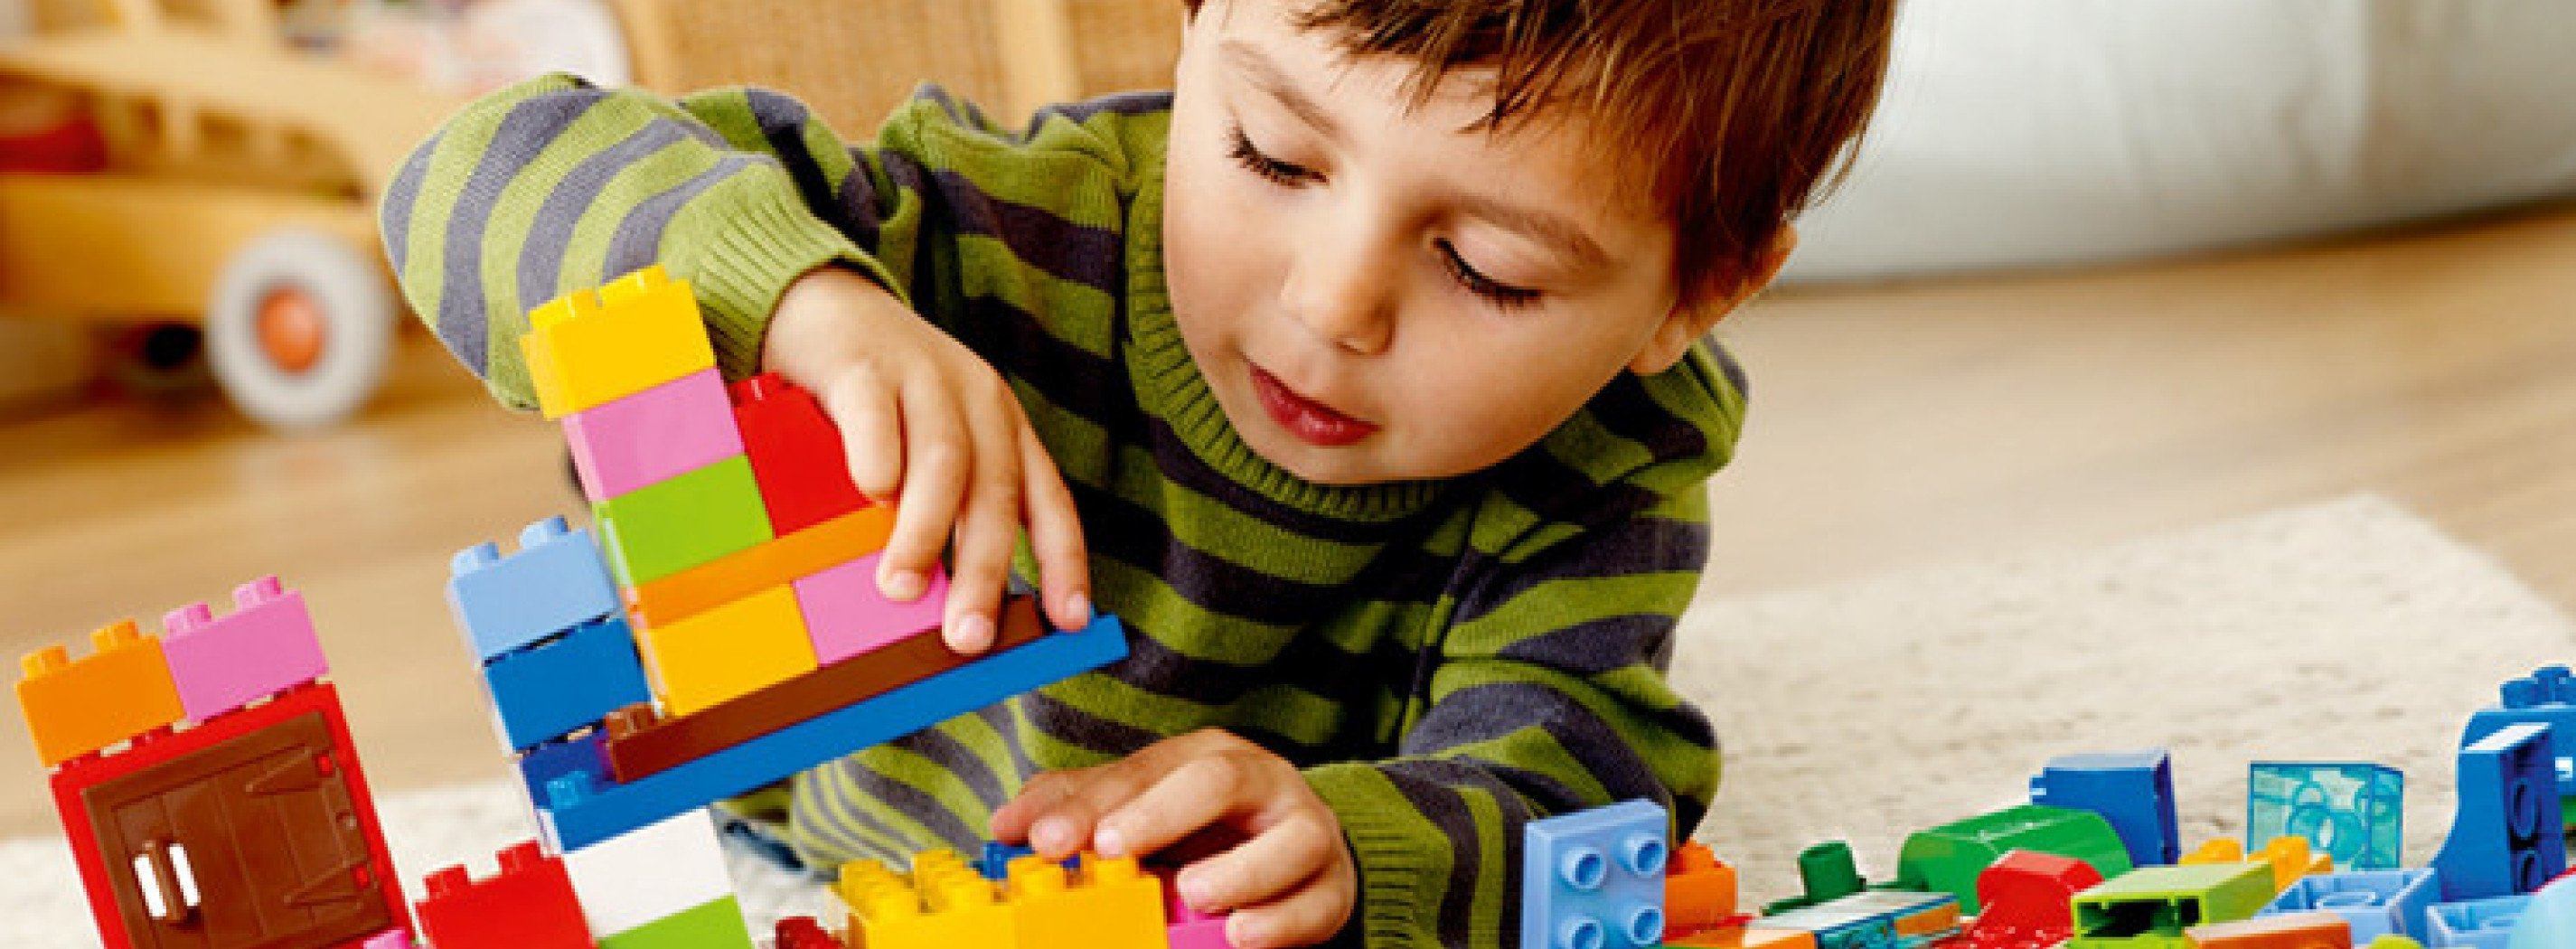 Lego and Blocks for child care centres and schools – Louise Kool & Galt